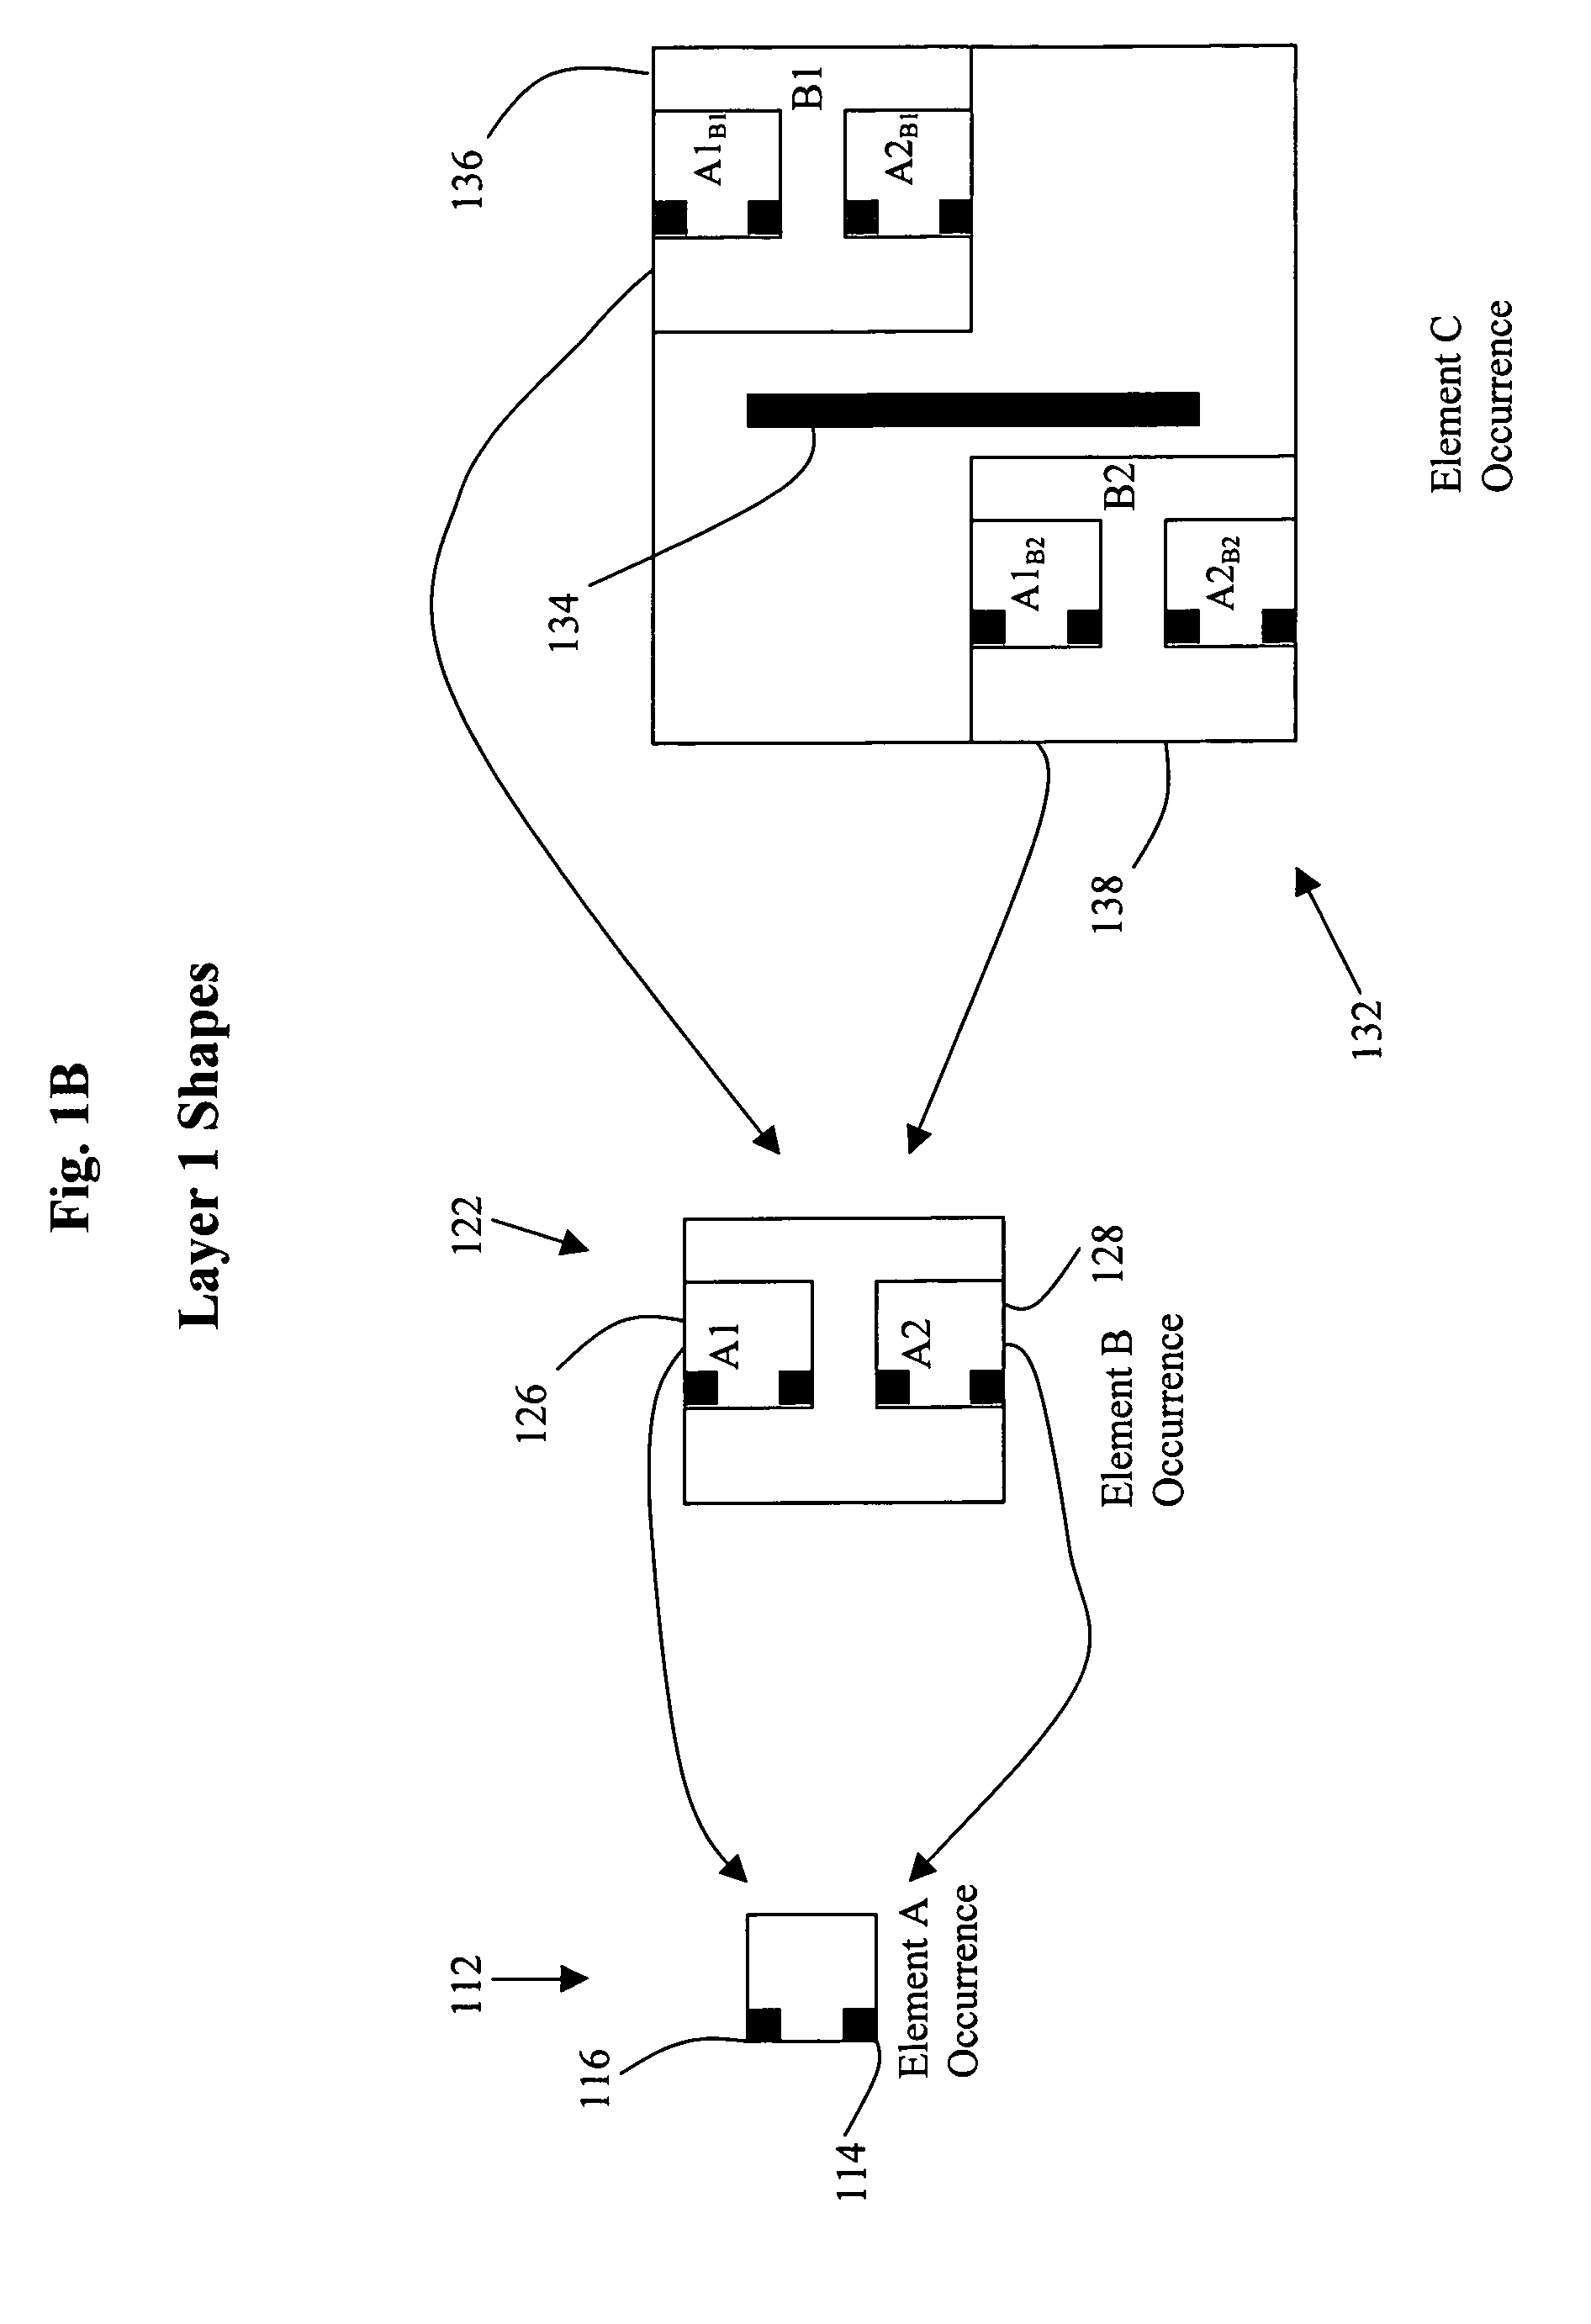 Method and mechanism for identifying and tracking shape connectivity